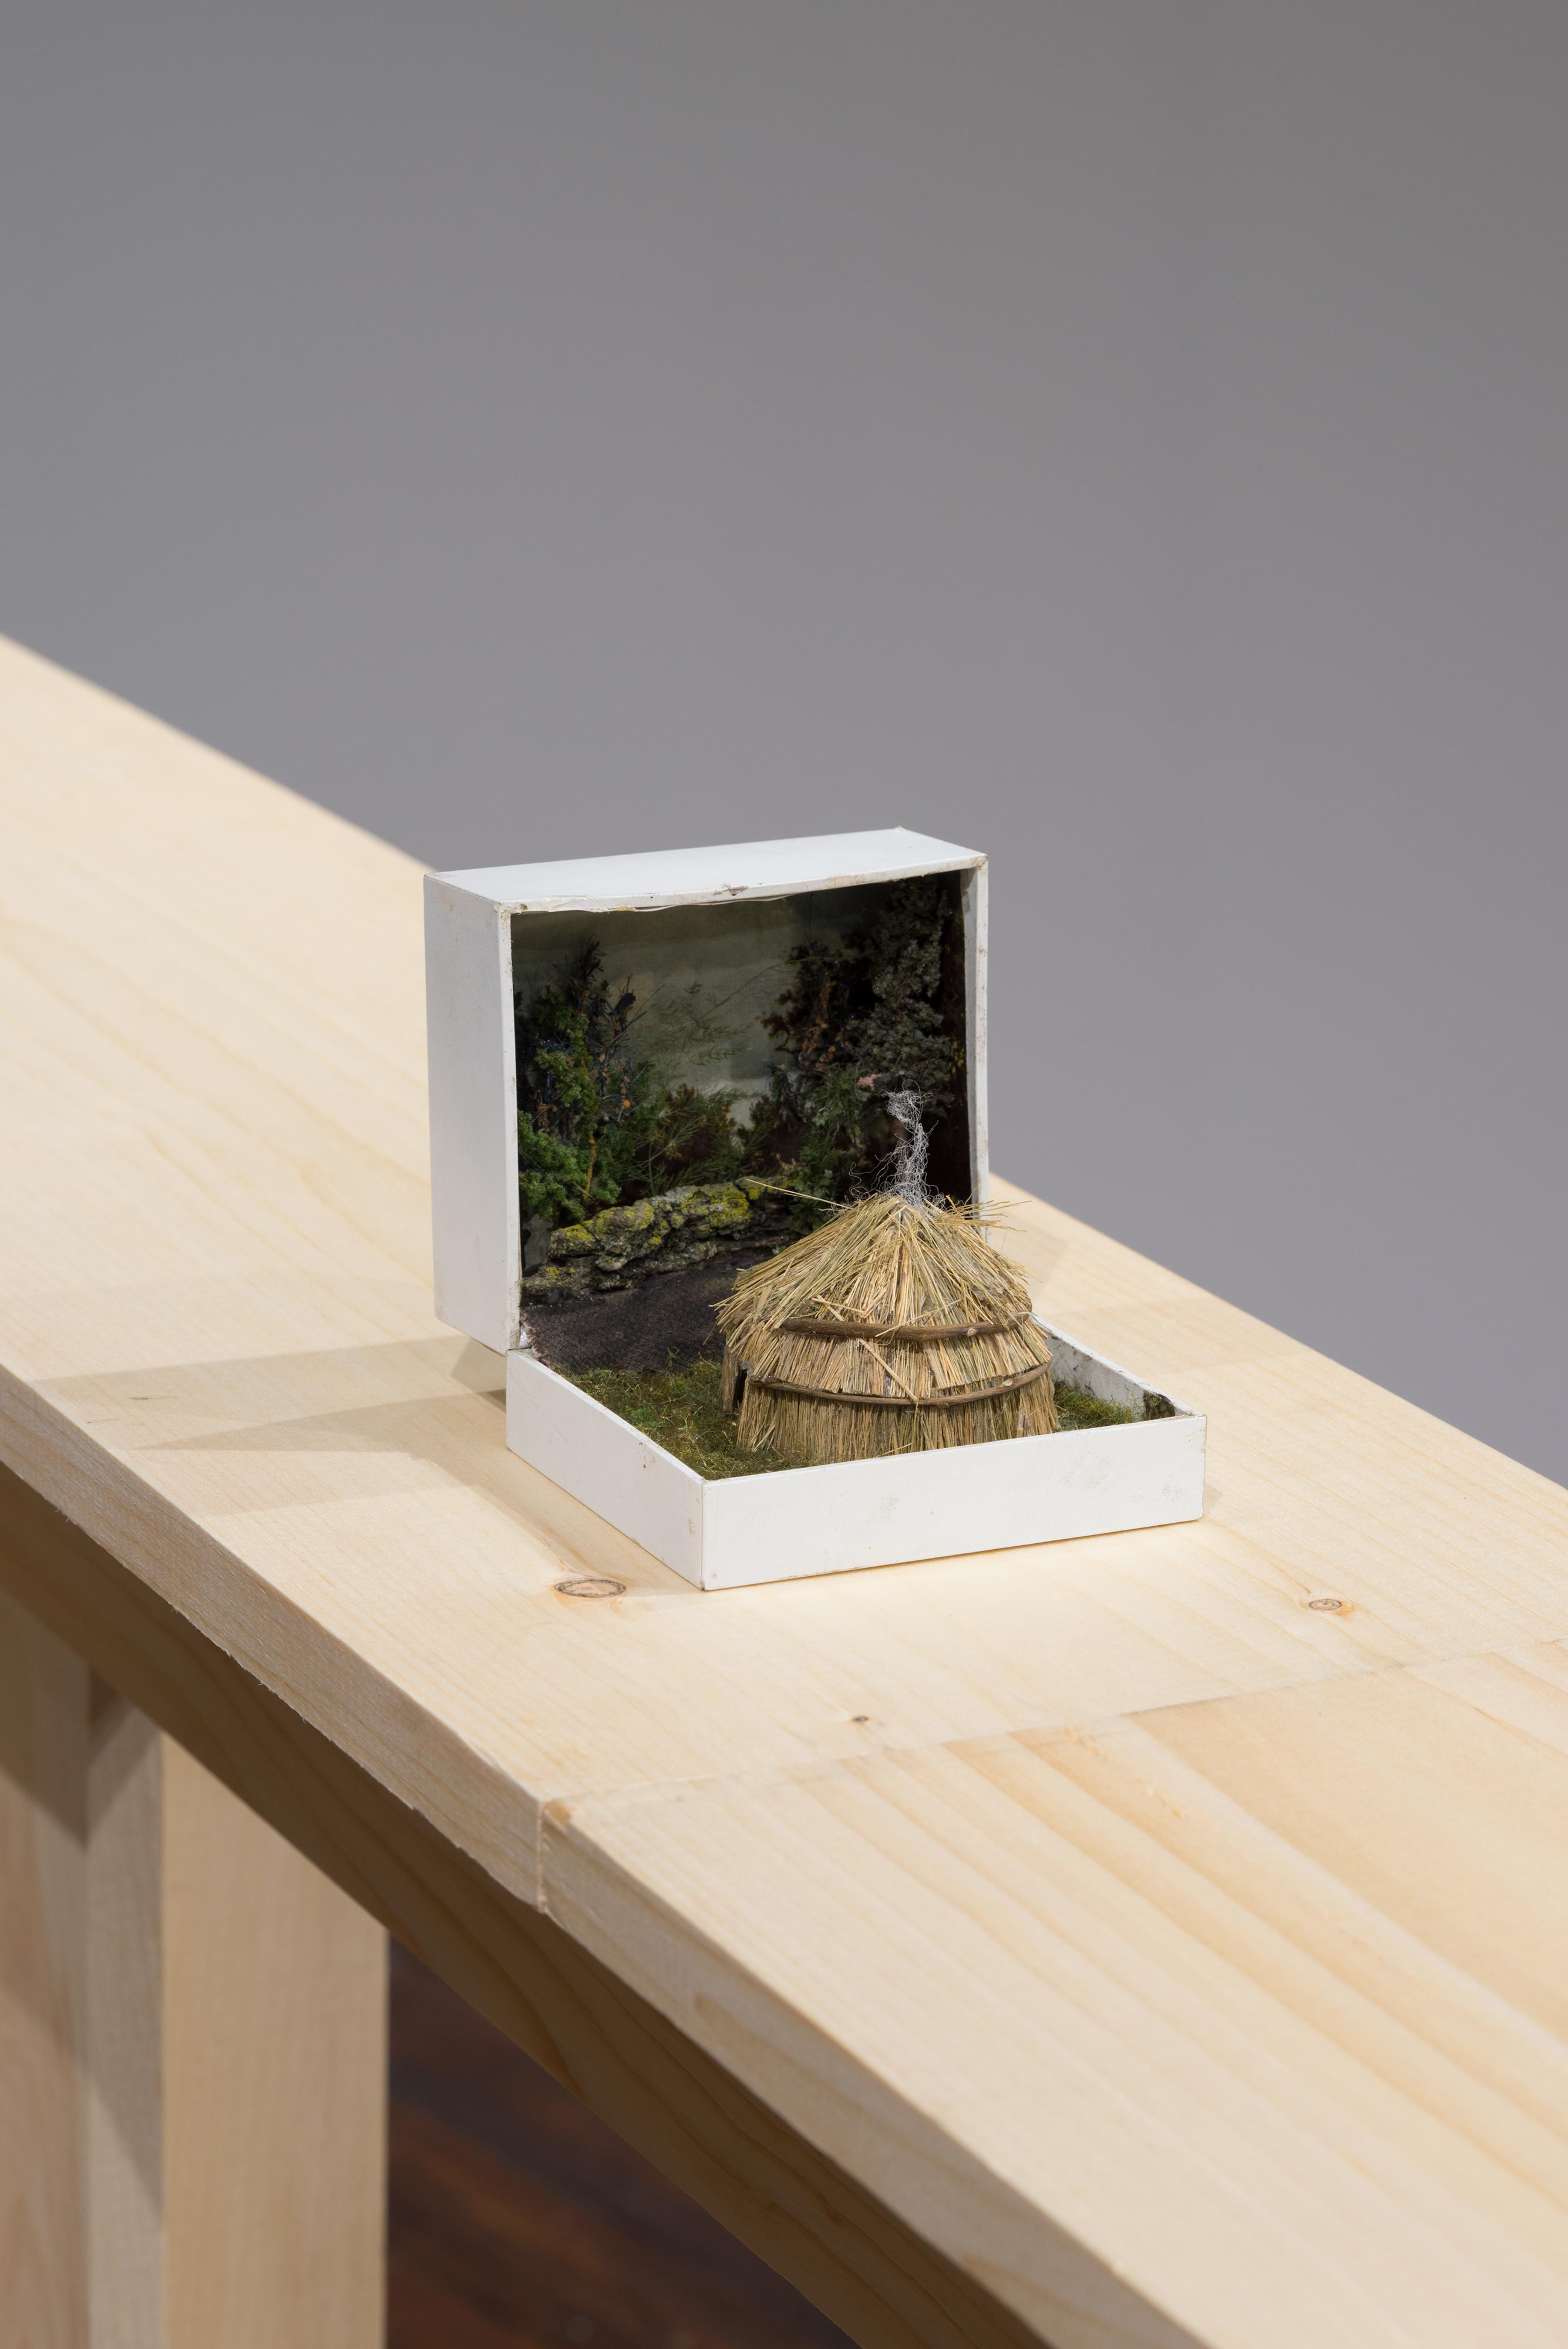 Curtis Talwst Santiago<br>Lenape Wigwam in Clearing<br>2016<br>Mixed media diorama in reclaimed jewelry box<br>3.875 x 3.3 x 4 in (9.8 x 8.4 x 10.2 cm)